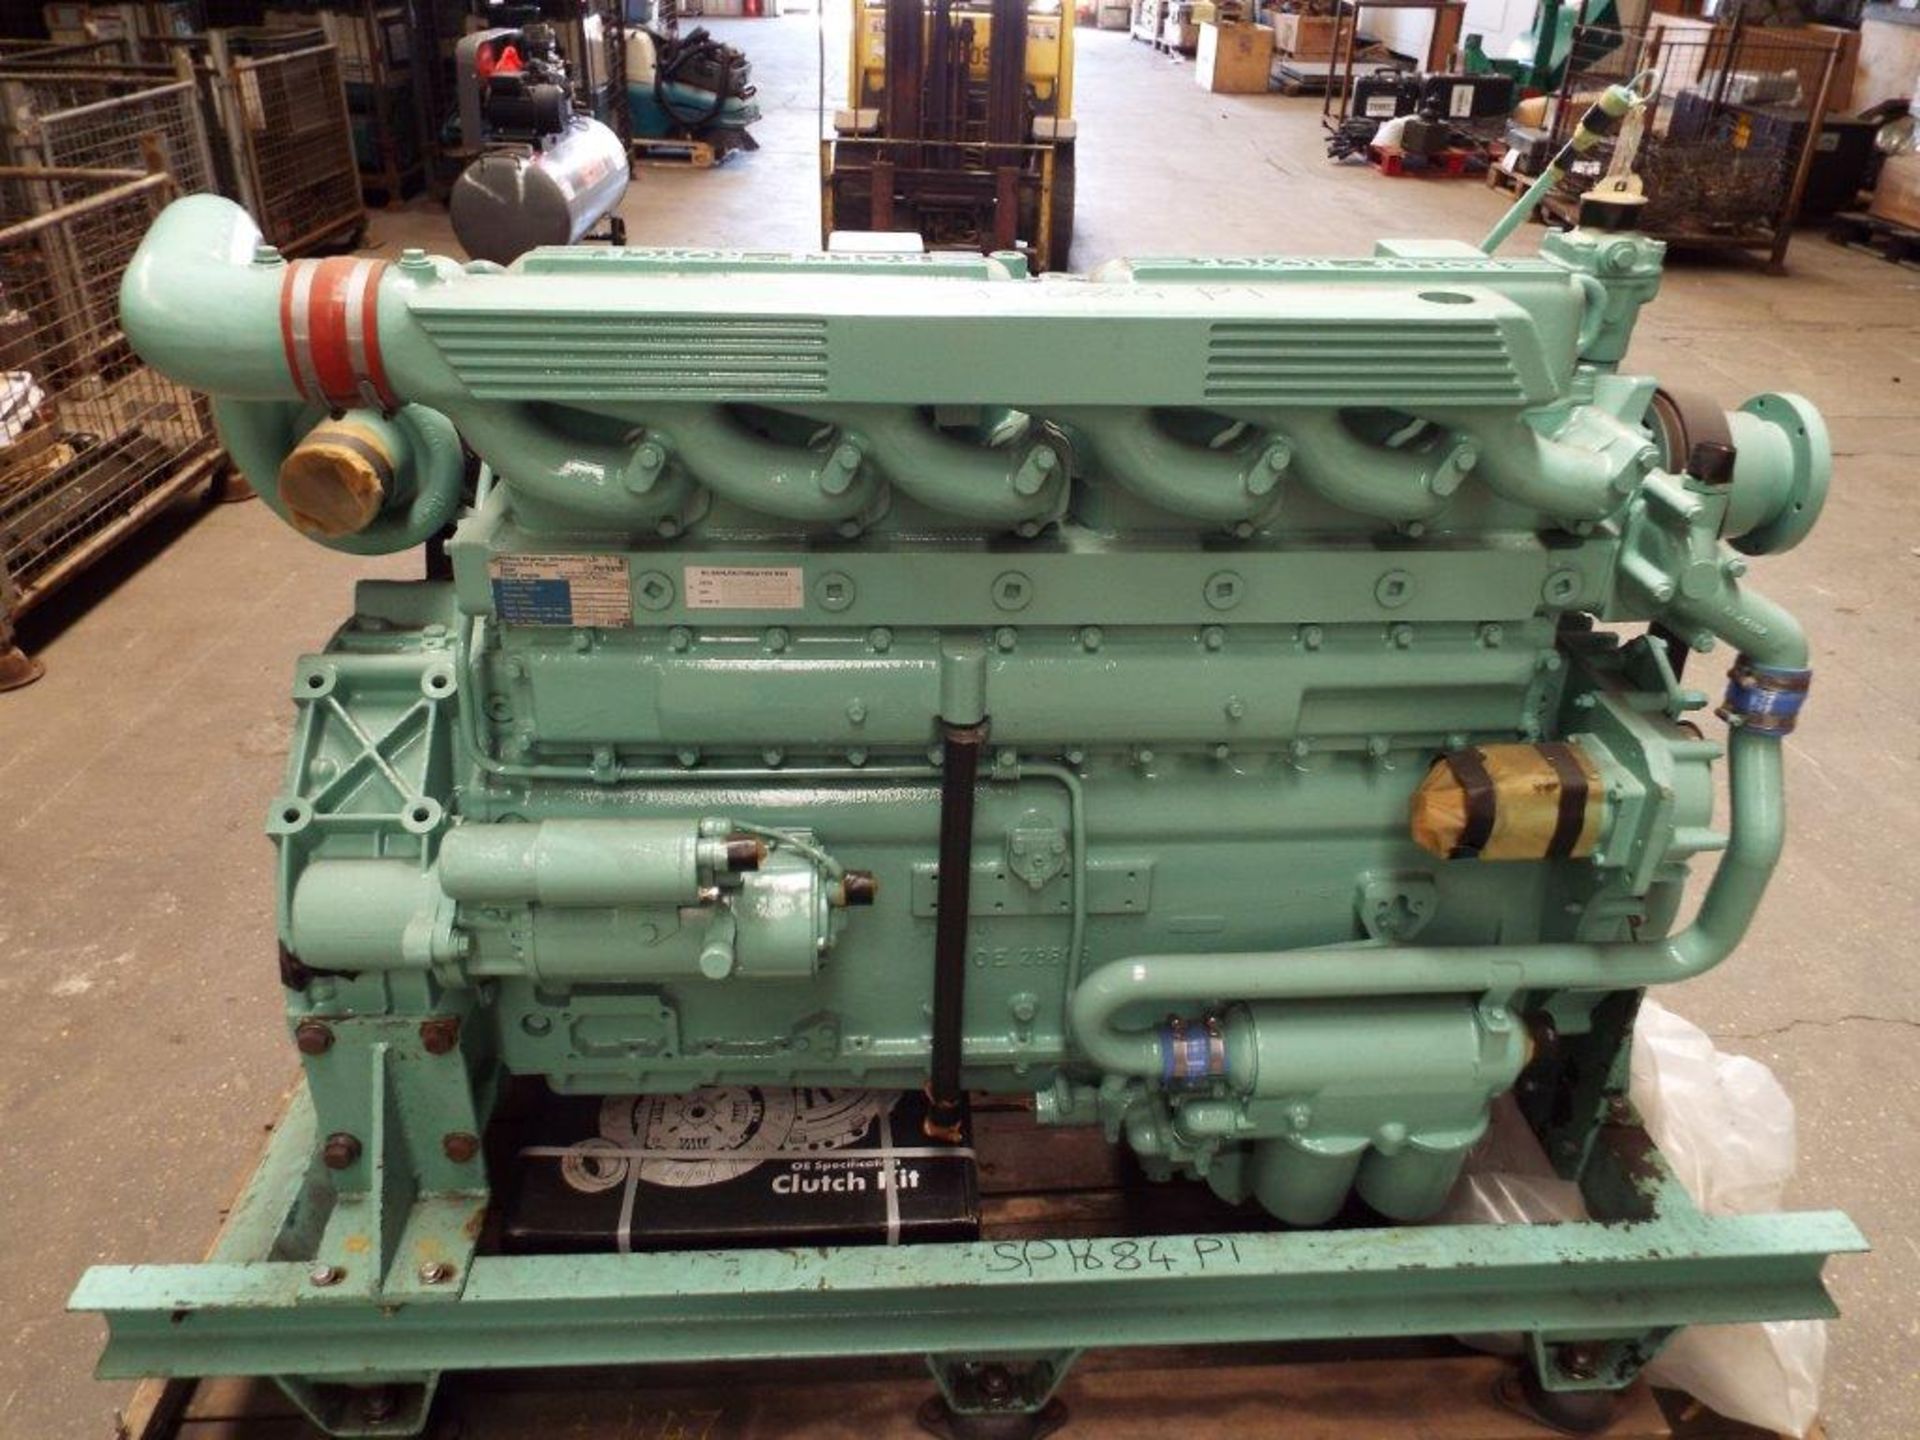 A1 Reconditioned Rolls Royce/Perkins 290L Straight 6 Turbo Diesel Engine for Foden Recovery Vehicles - Image 8 of 20